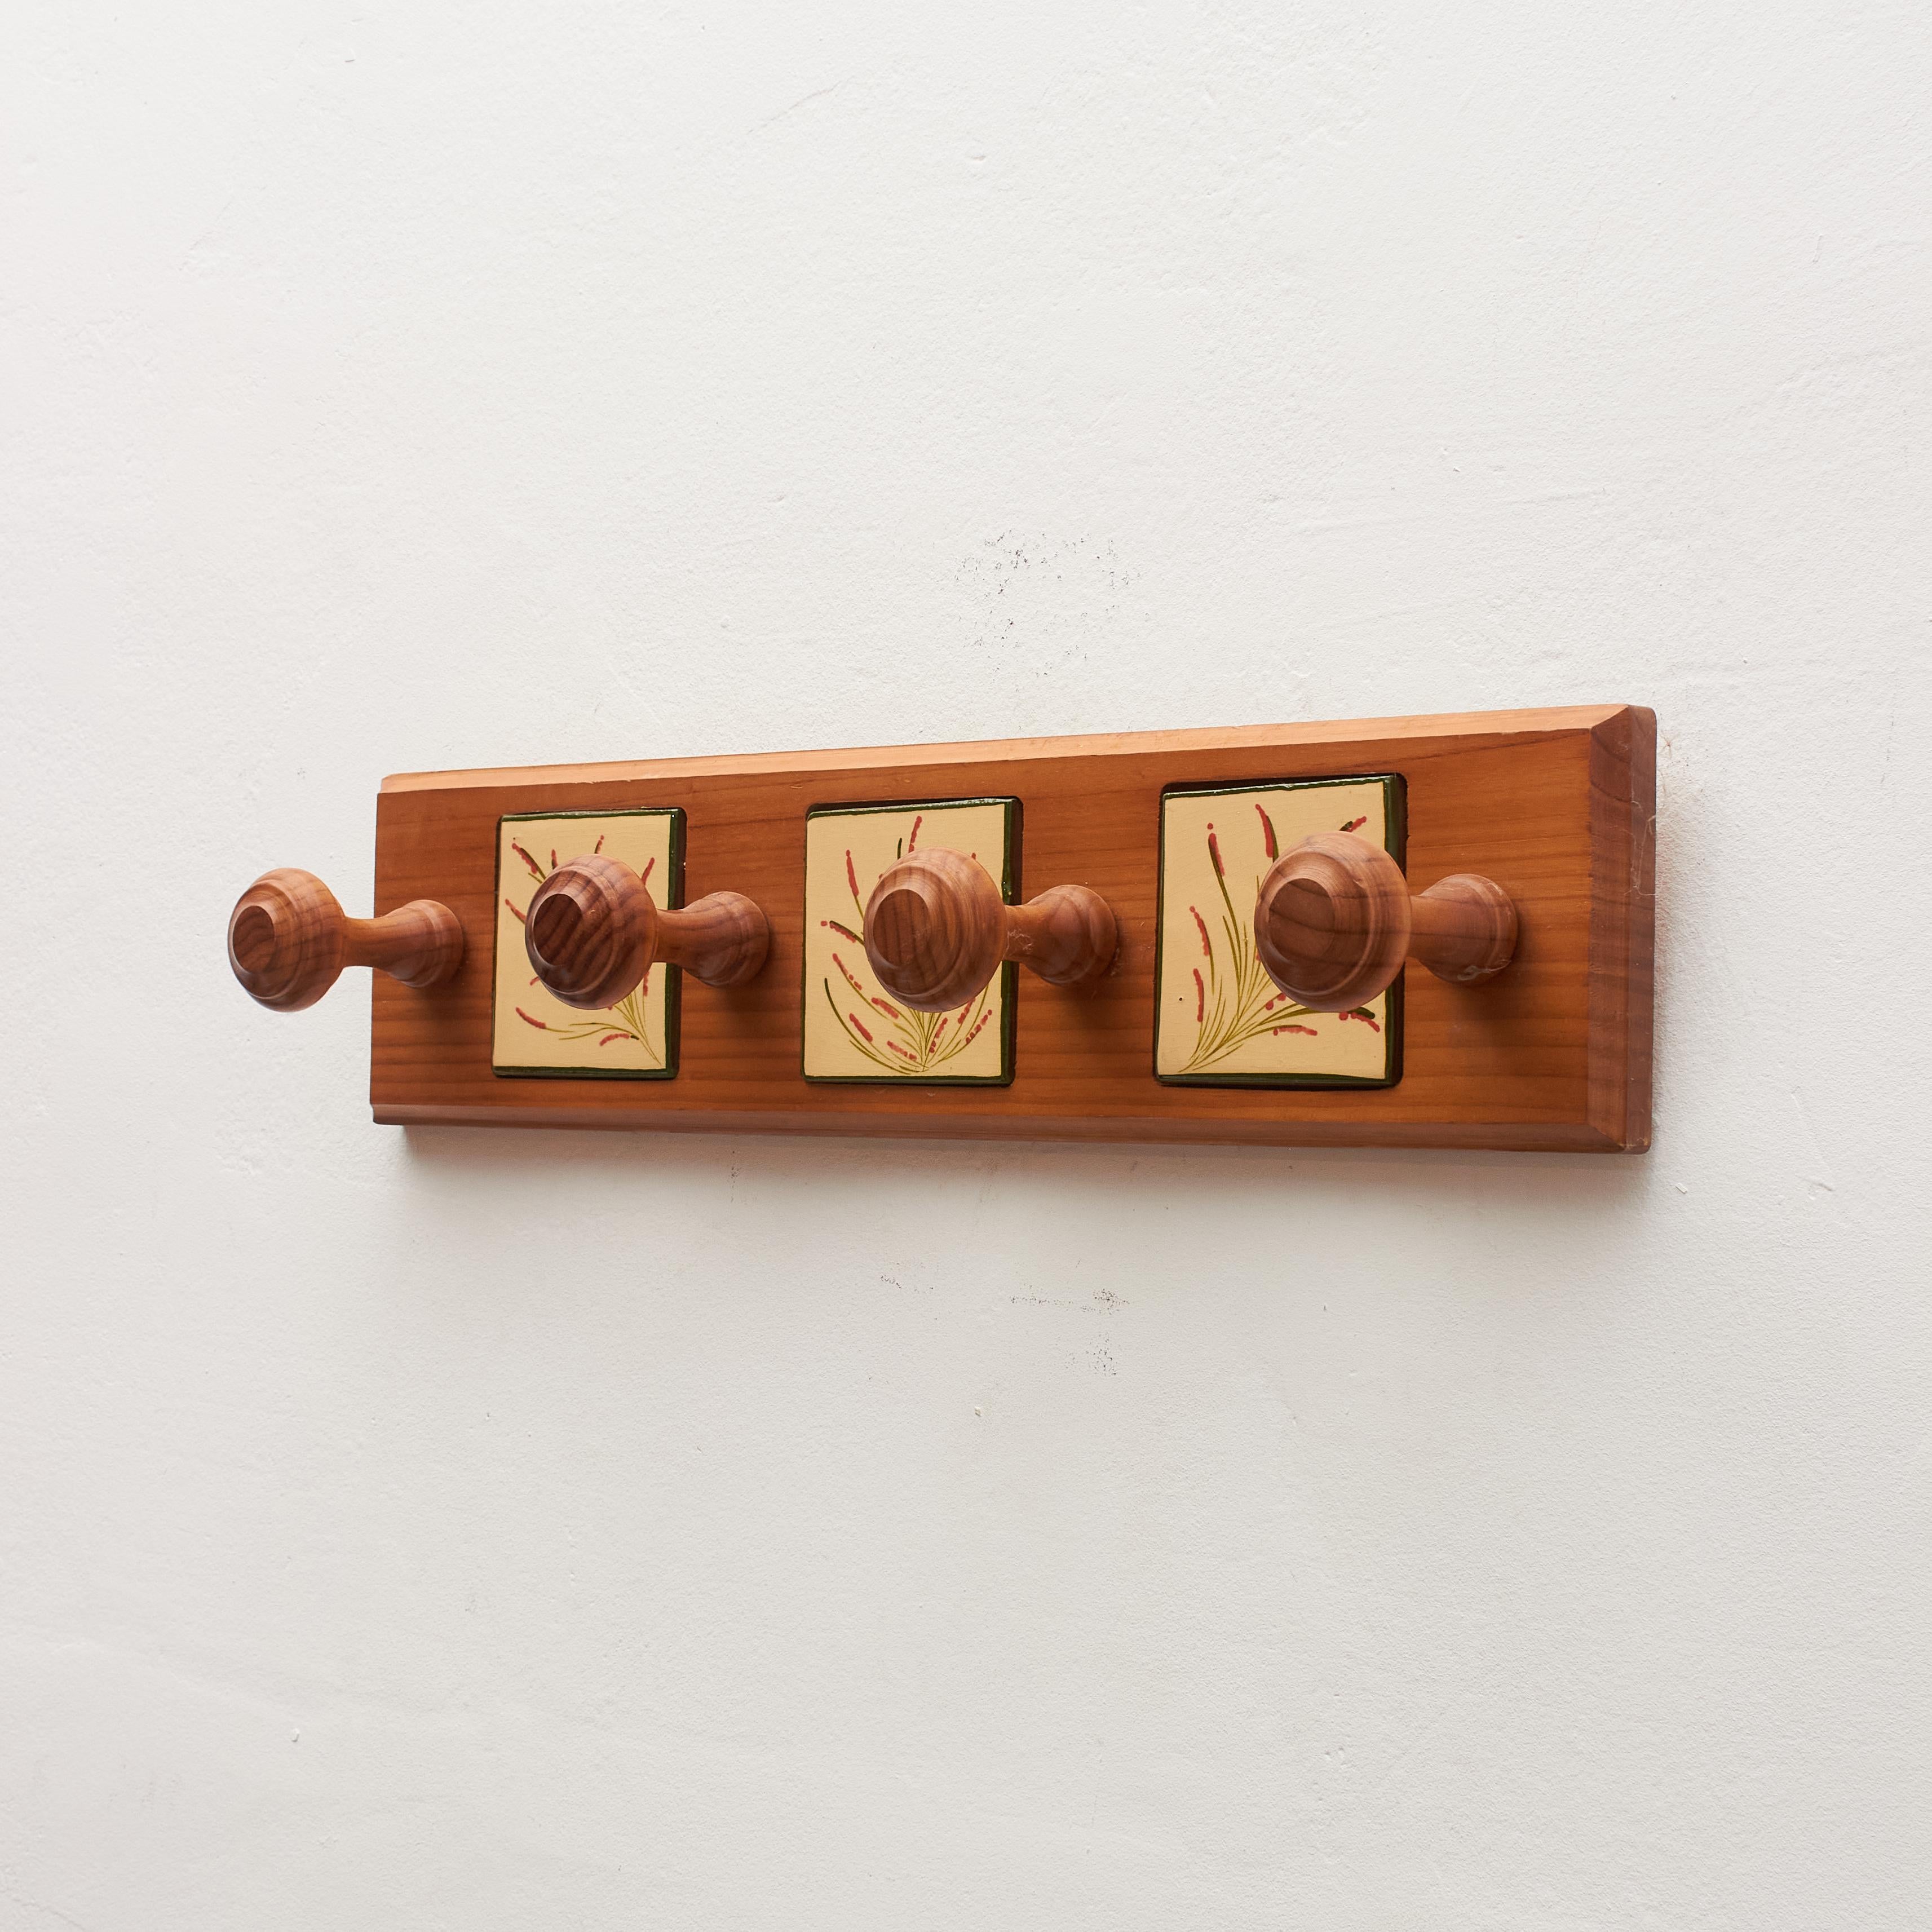 Spanish Vintage 1960 Catalan Artist Diaz Costa Hand-Painted Ceramic and Wood Hanger For Sale